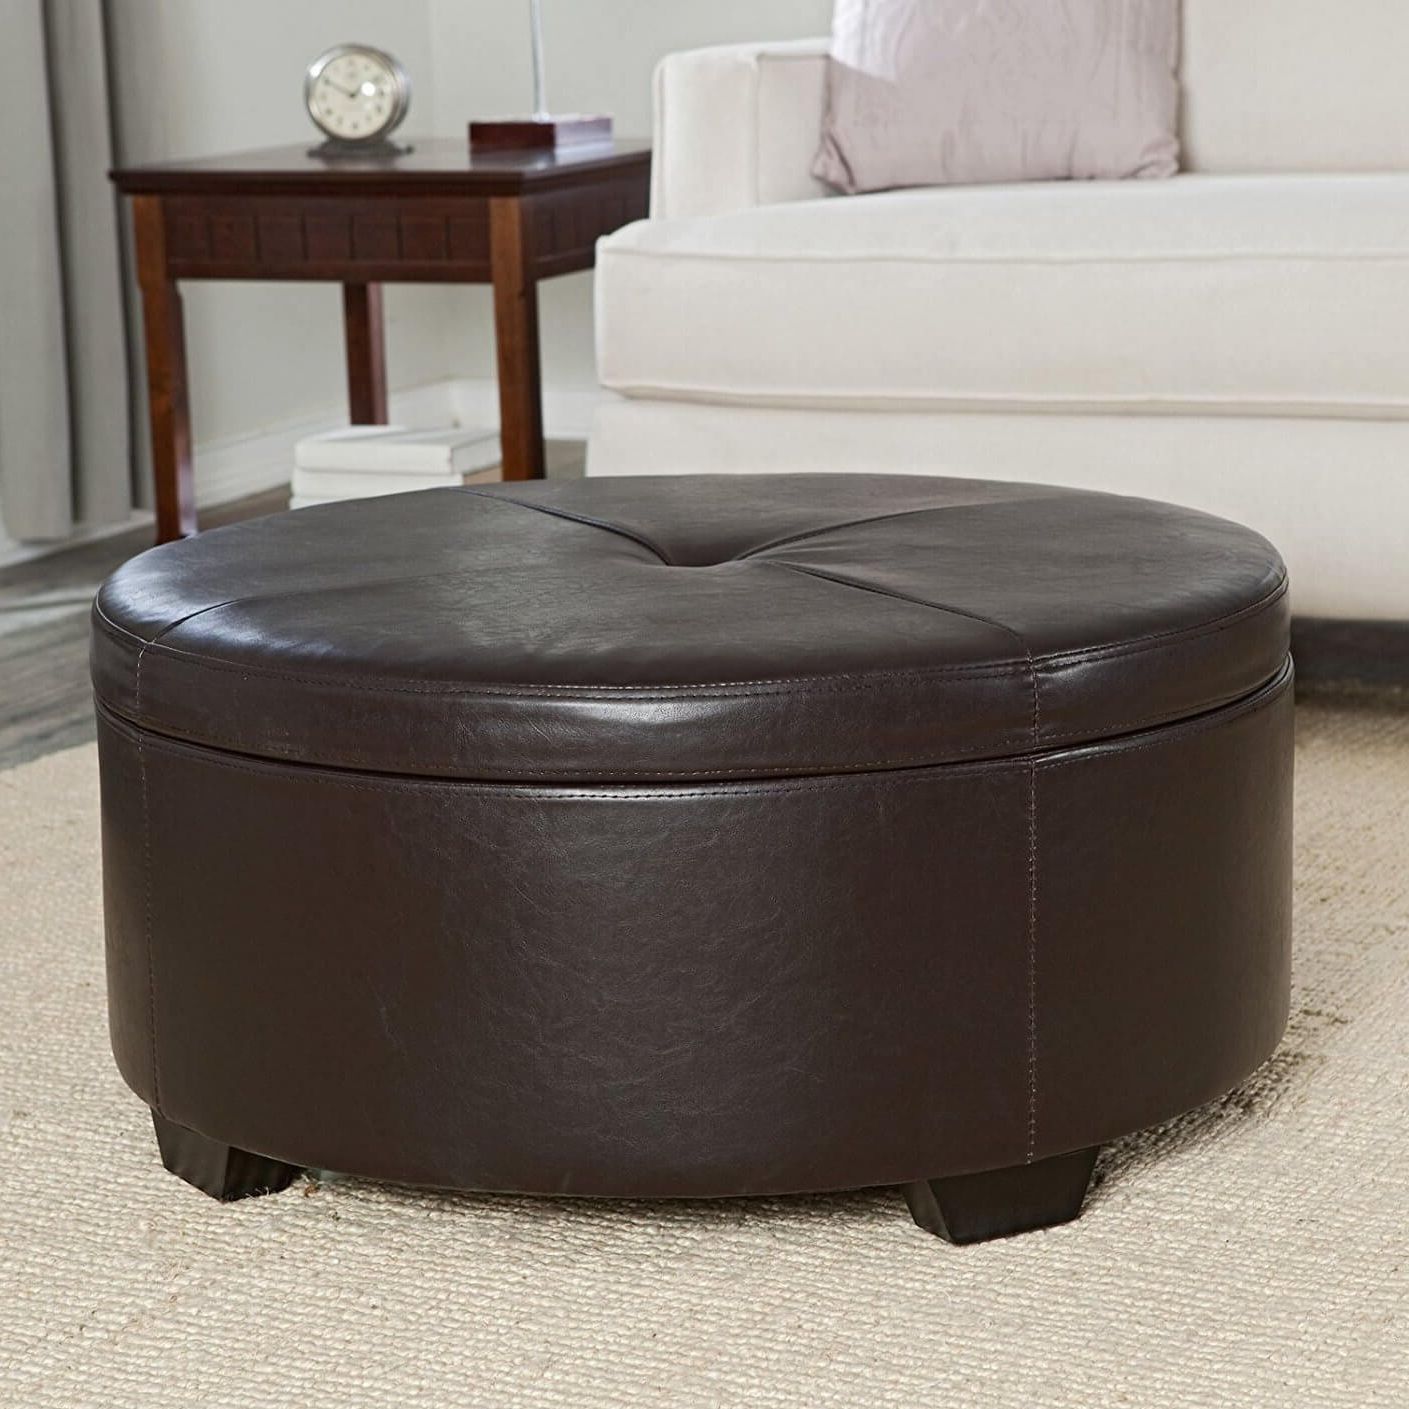 Round Black Tasseled Ottomans Pertaining To Most Recent Black Round Ottoman (View 6 of 10)